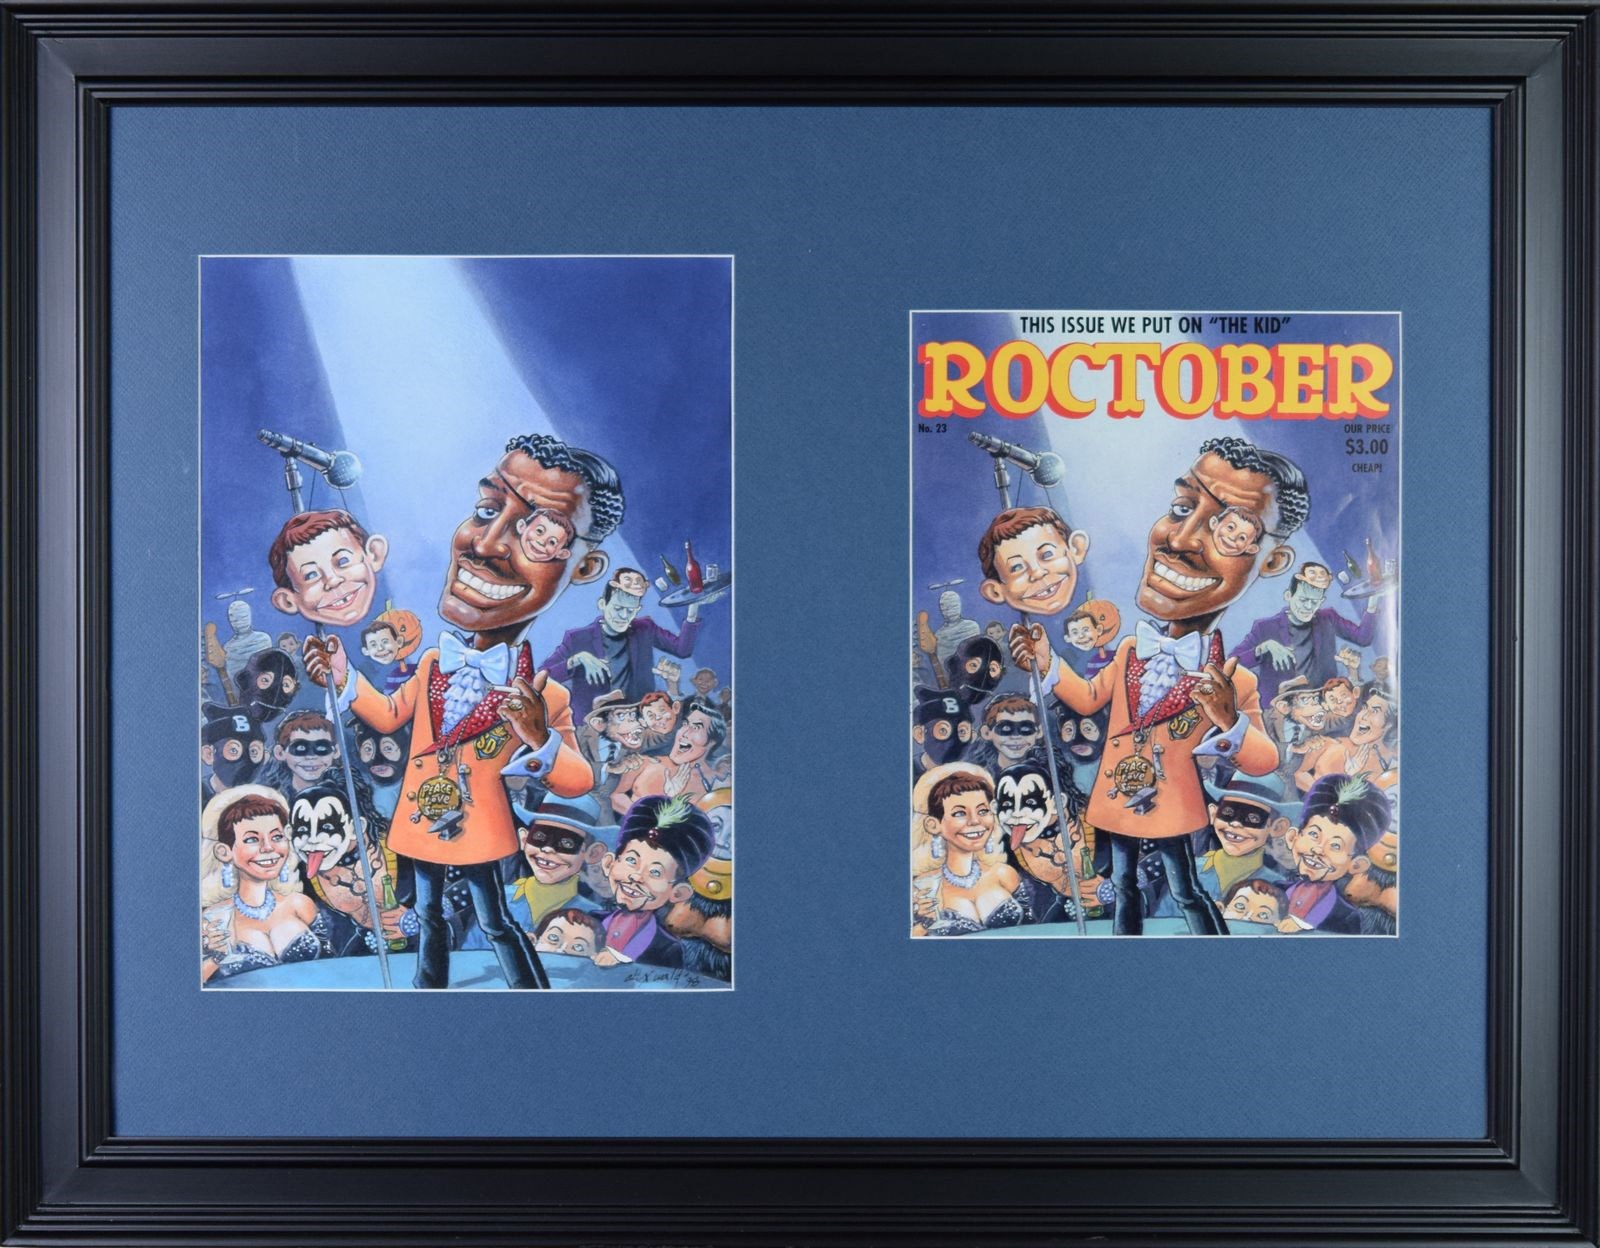 - MAD Magazine Original Cover Art for the Publication Rocktober #23 featuring Sammy Davis Jr. and a MAD Crowd